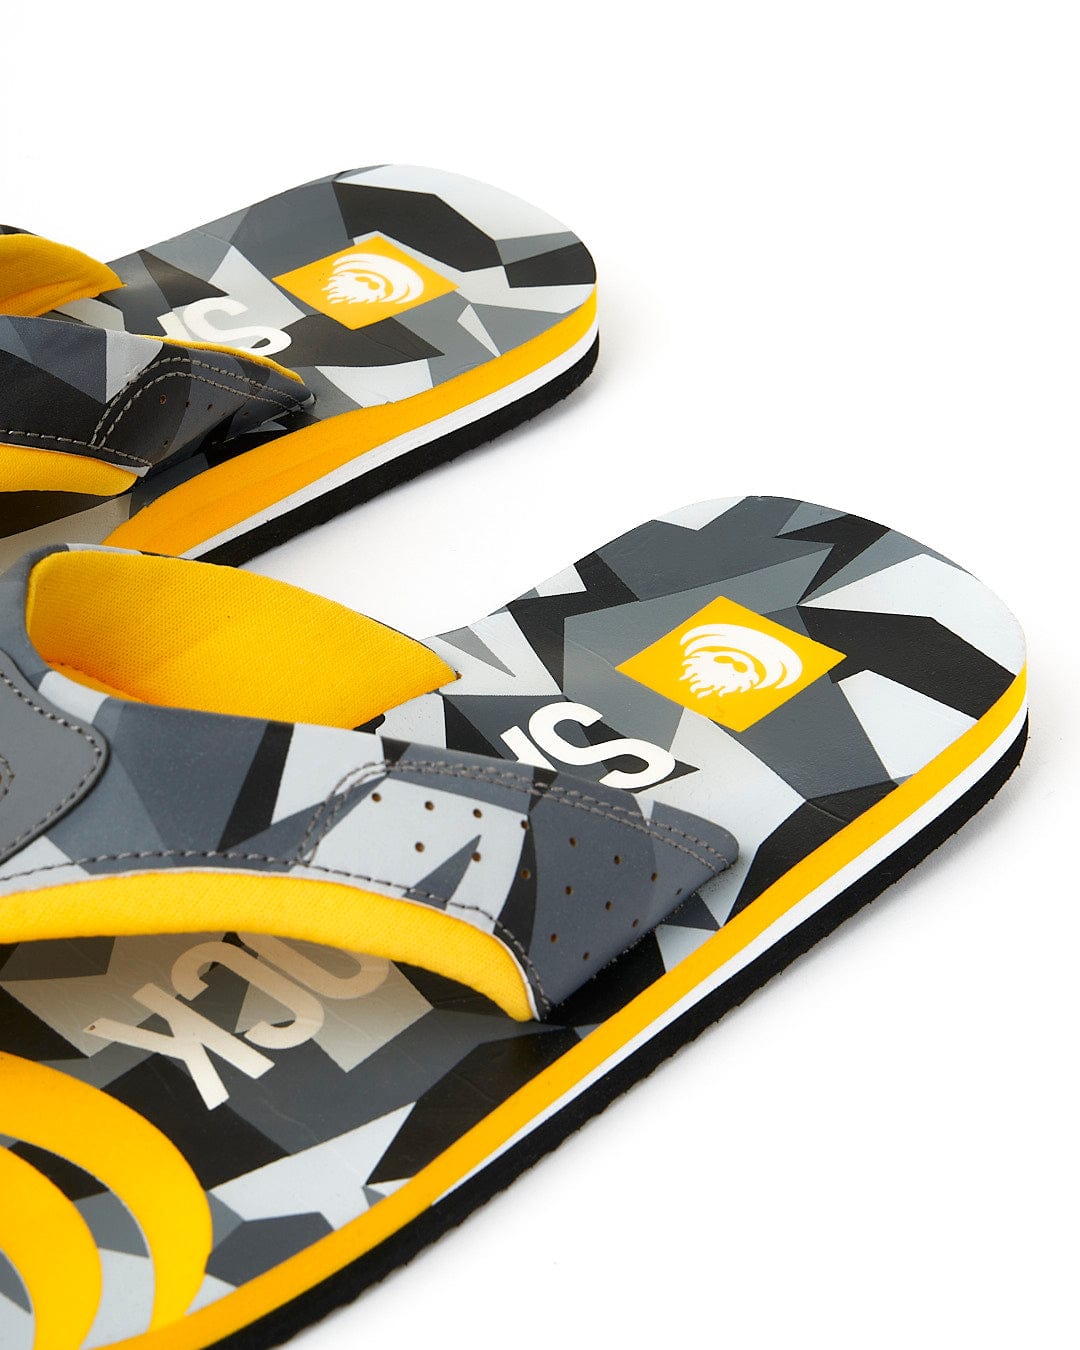 A pair of Saltrock Camo Corp Flip Flops with yellow and grey designs featuring Dark Grey accents.